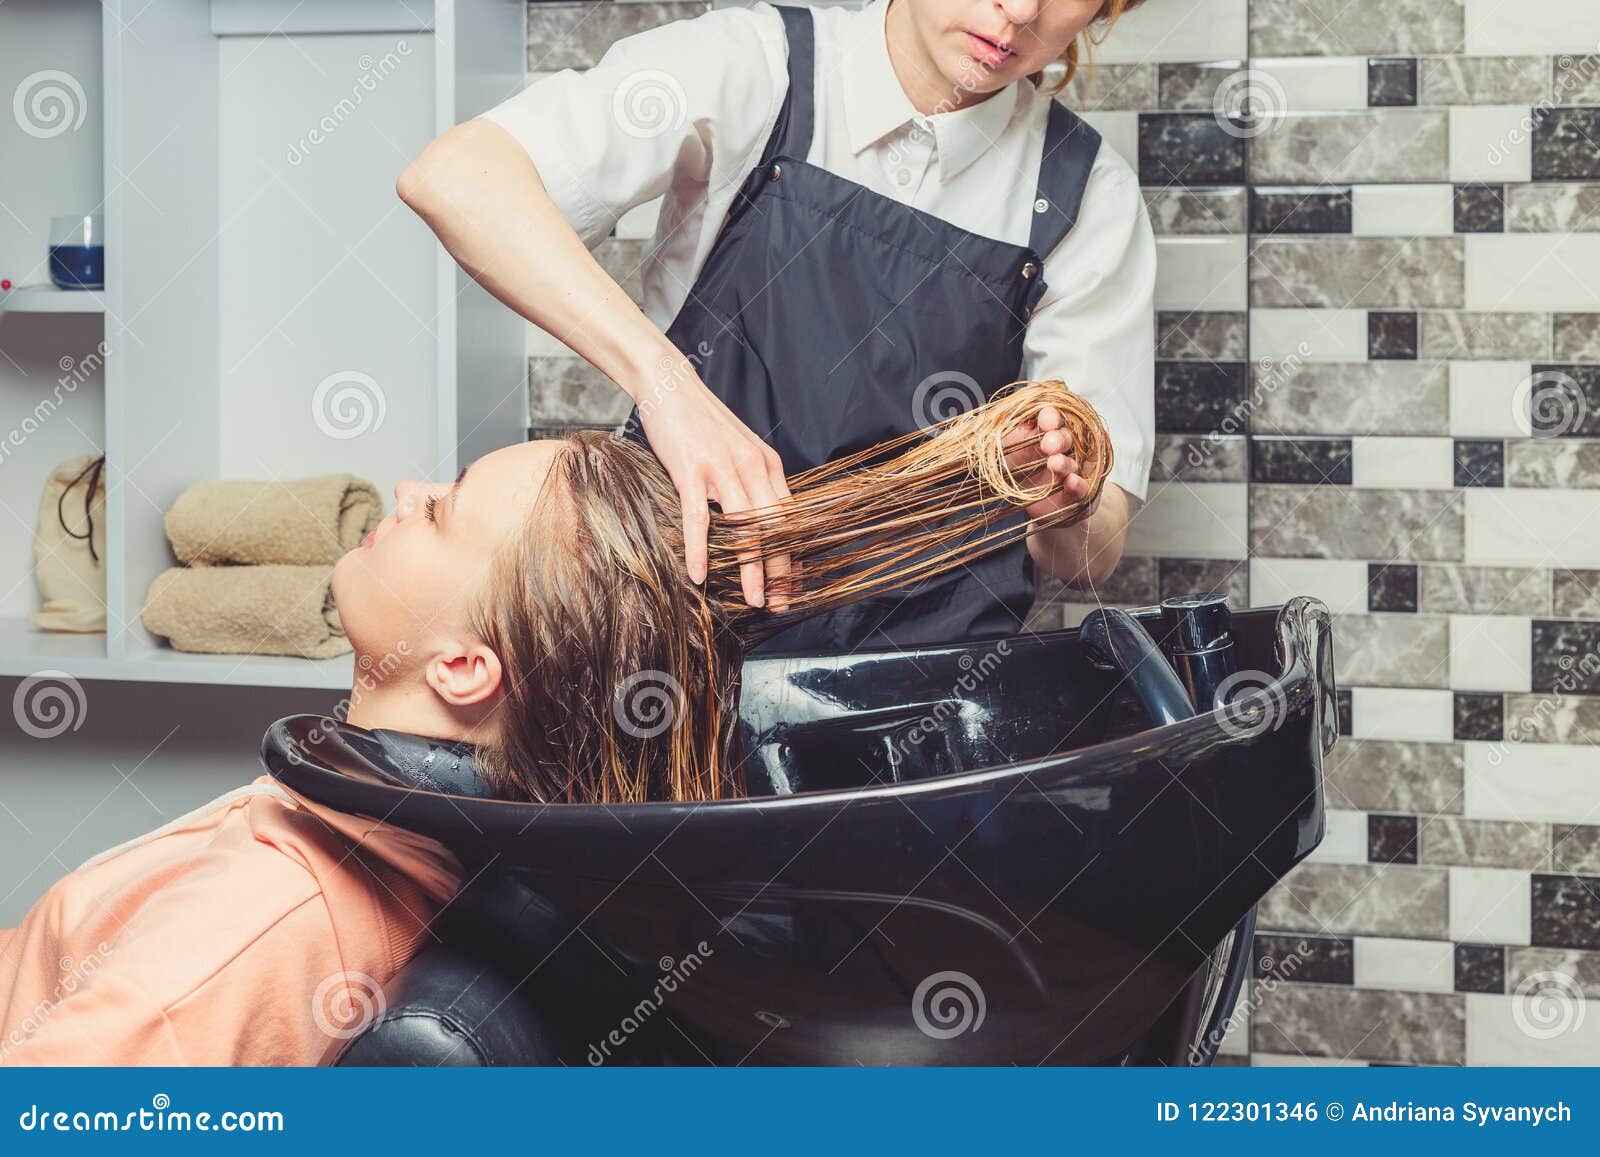 Hair Wash Procedure in a Beauty Salon Stock Photo - Image of face, close:  122301346